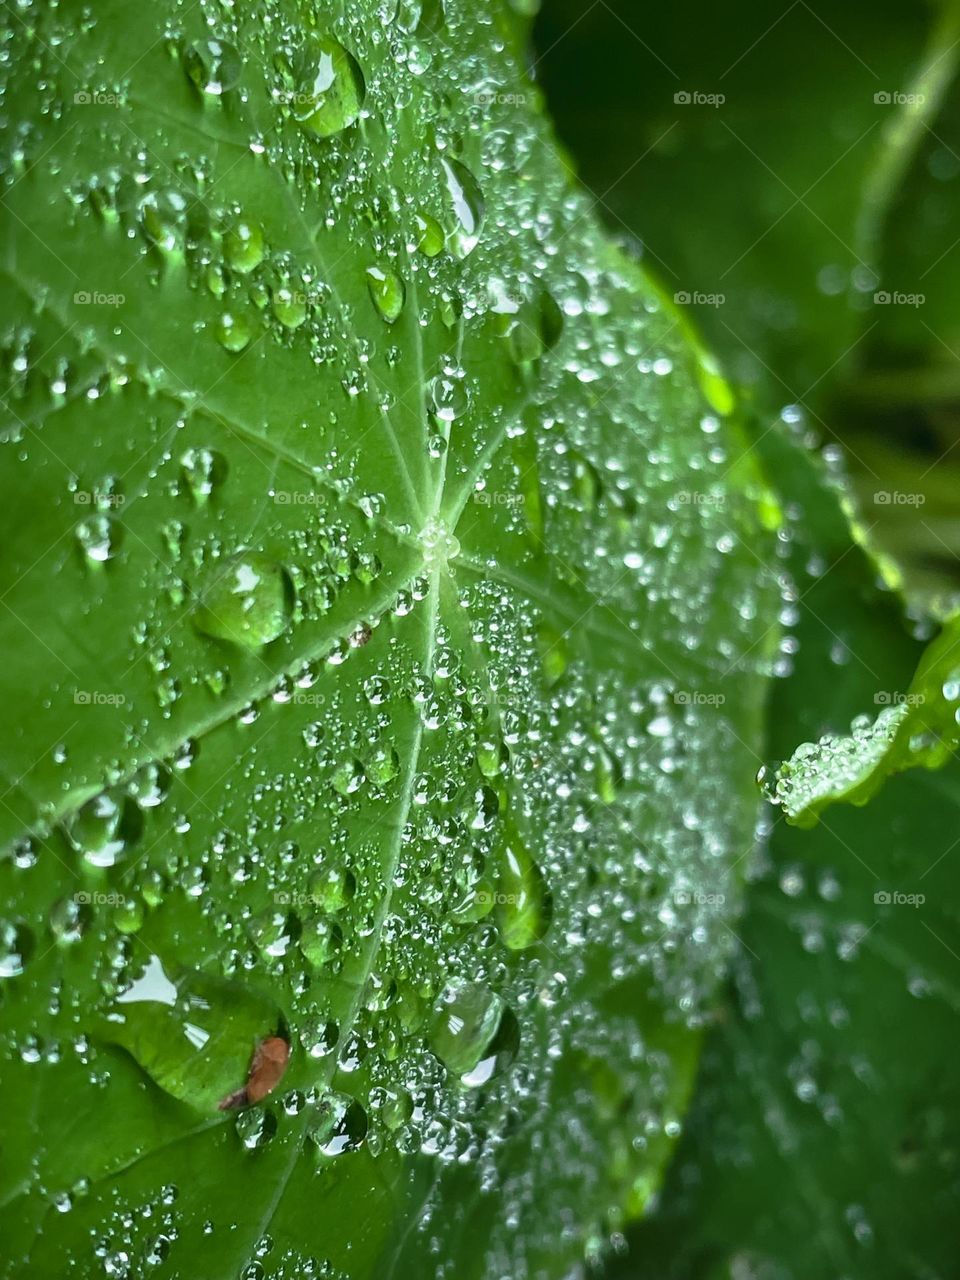 Plant veins leaves life leaf mother nature greenery fresh moisture dripping condensation liquid surface  interesting cool phone Amateur Beautiful outdoors earthy hippie living water wet water drops droplets bubbles dewdrops dew after rain storm 💧